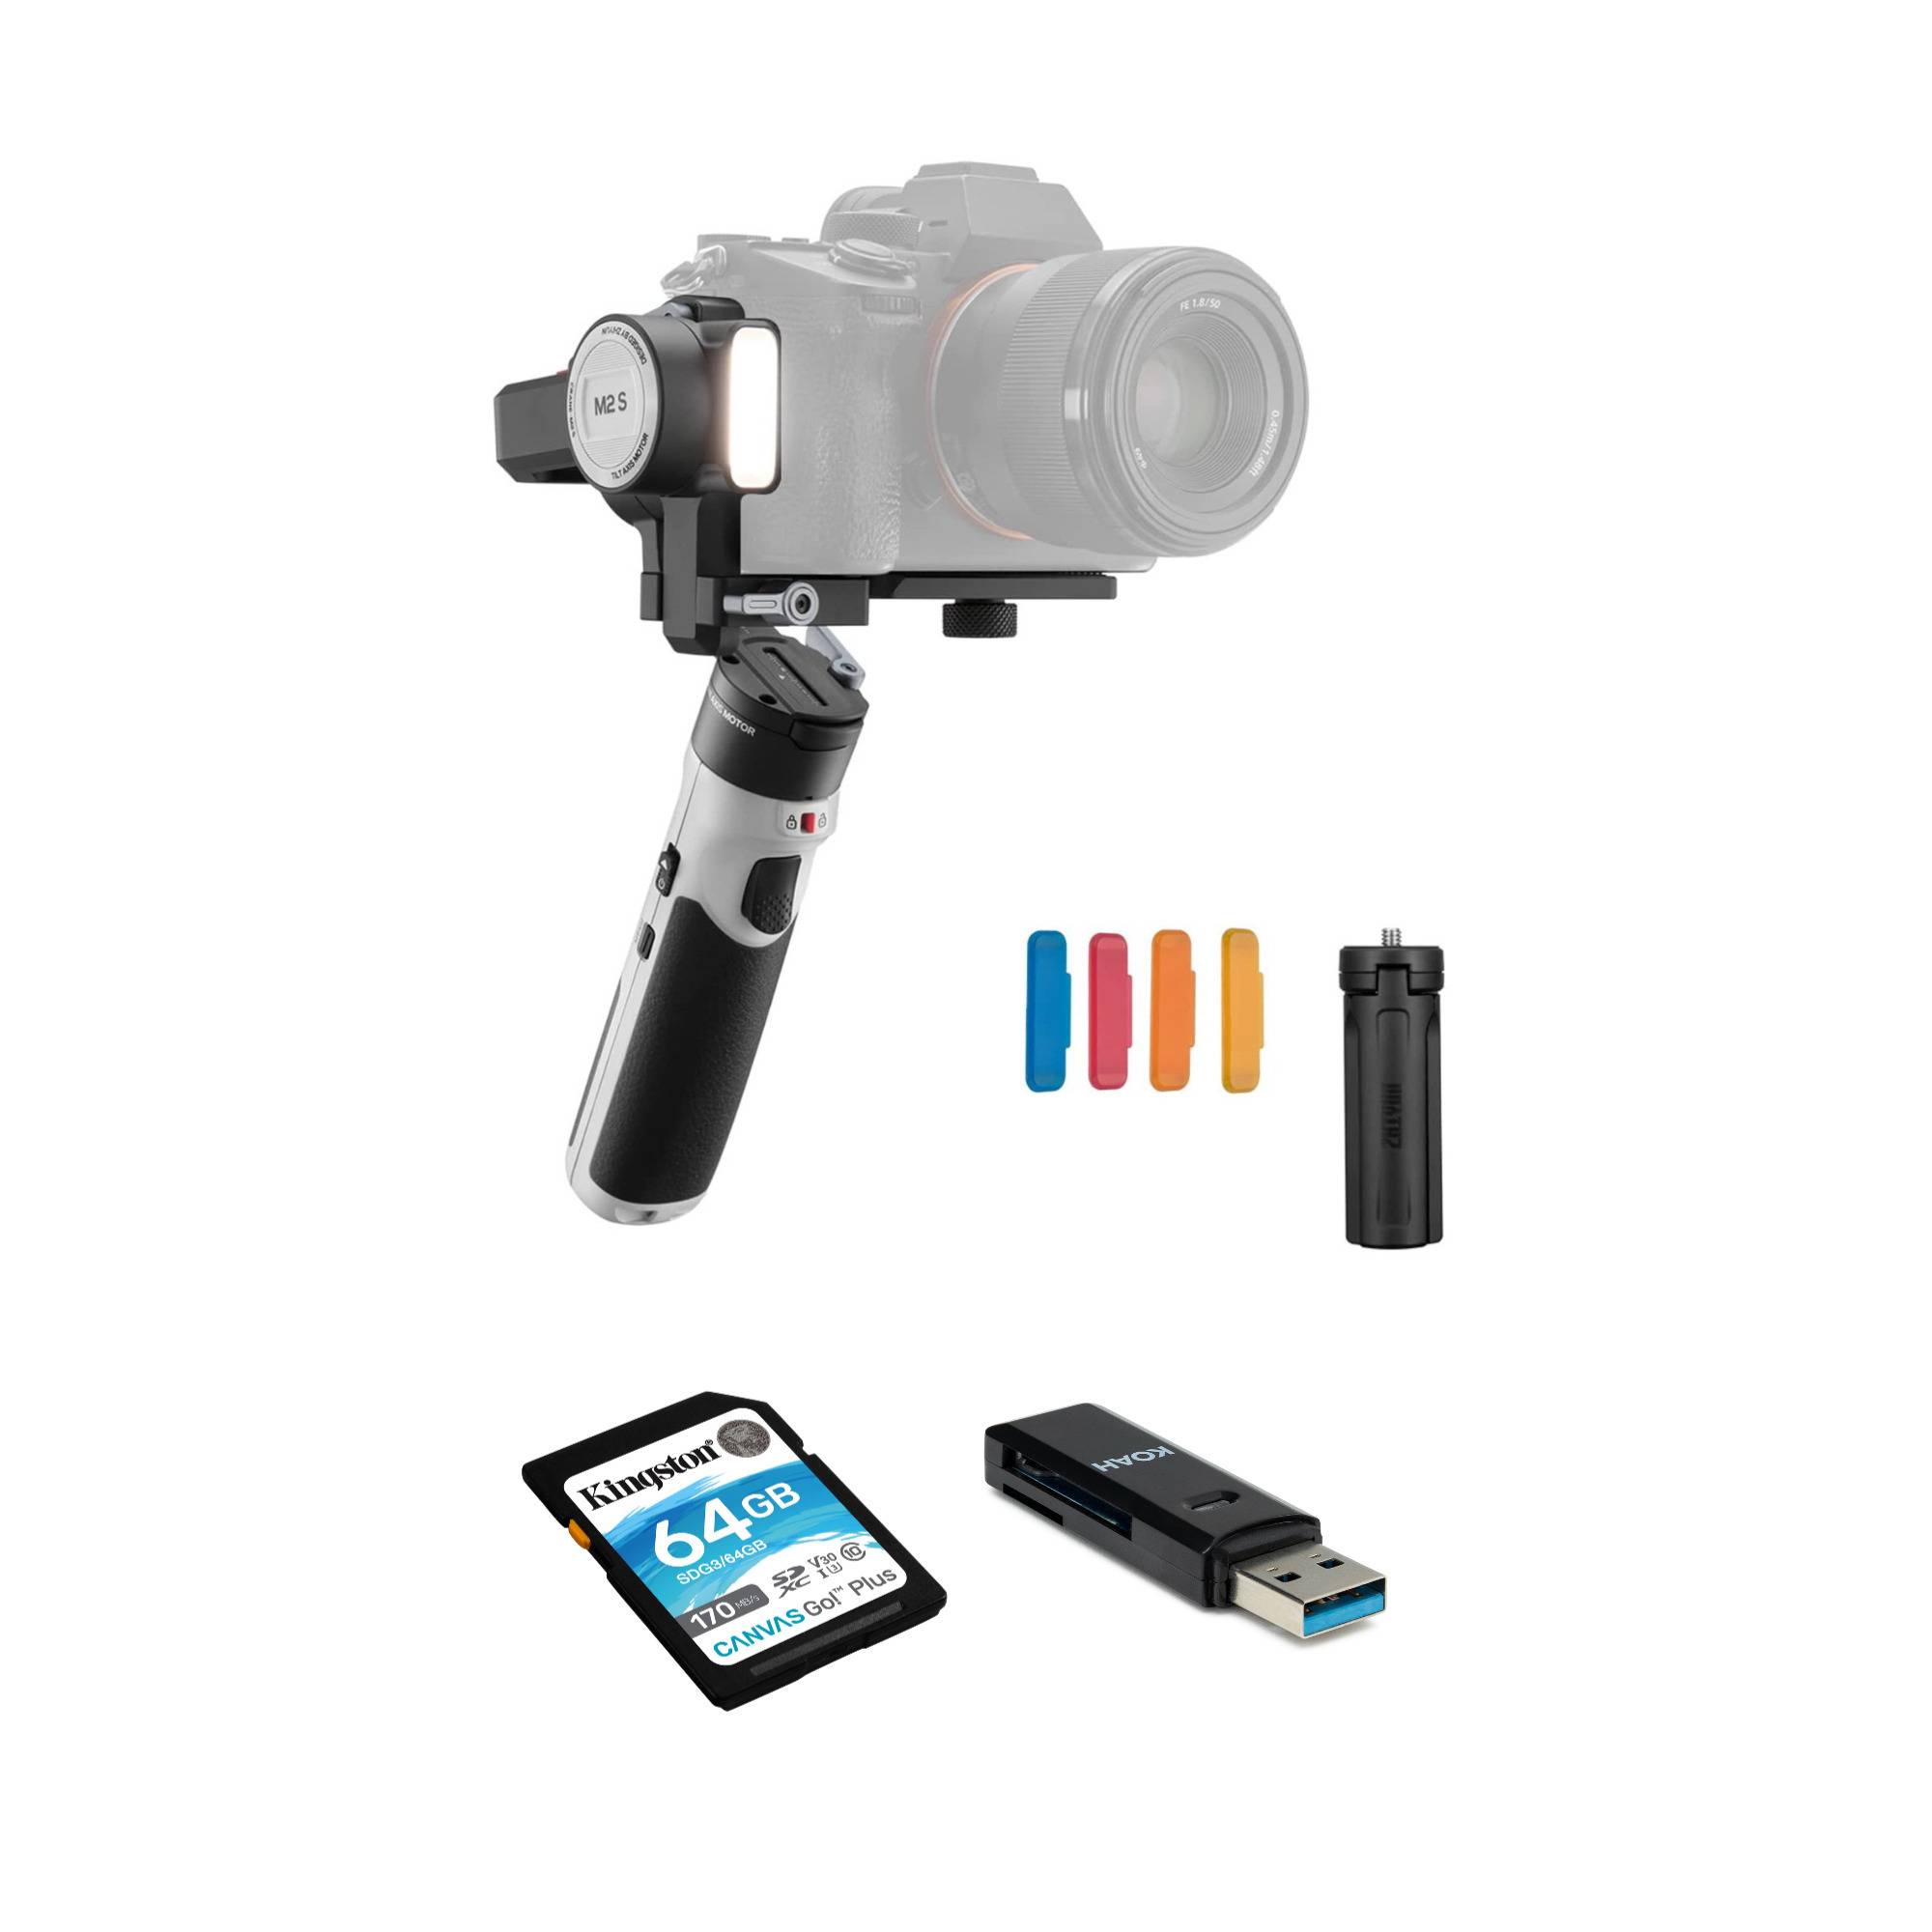 Zhiyun CRANE-M2 S 3-Axis Handheld Gimbal Stabilizer with 64GB Memory Card, and Memory Card Reader